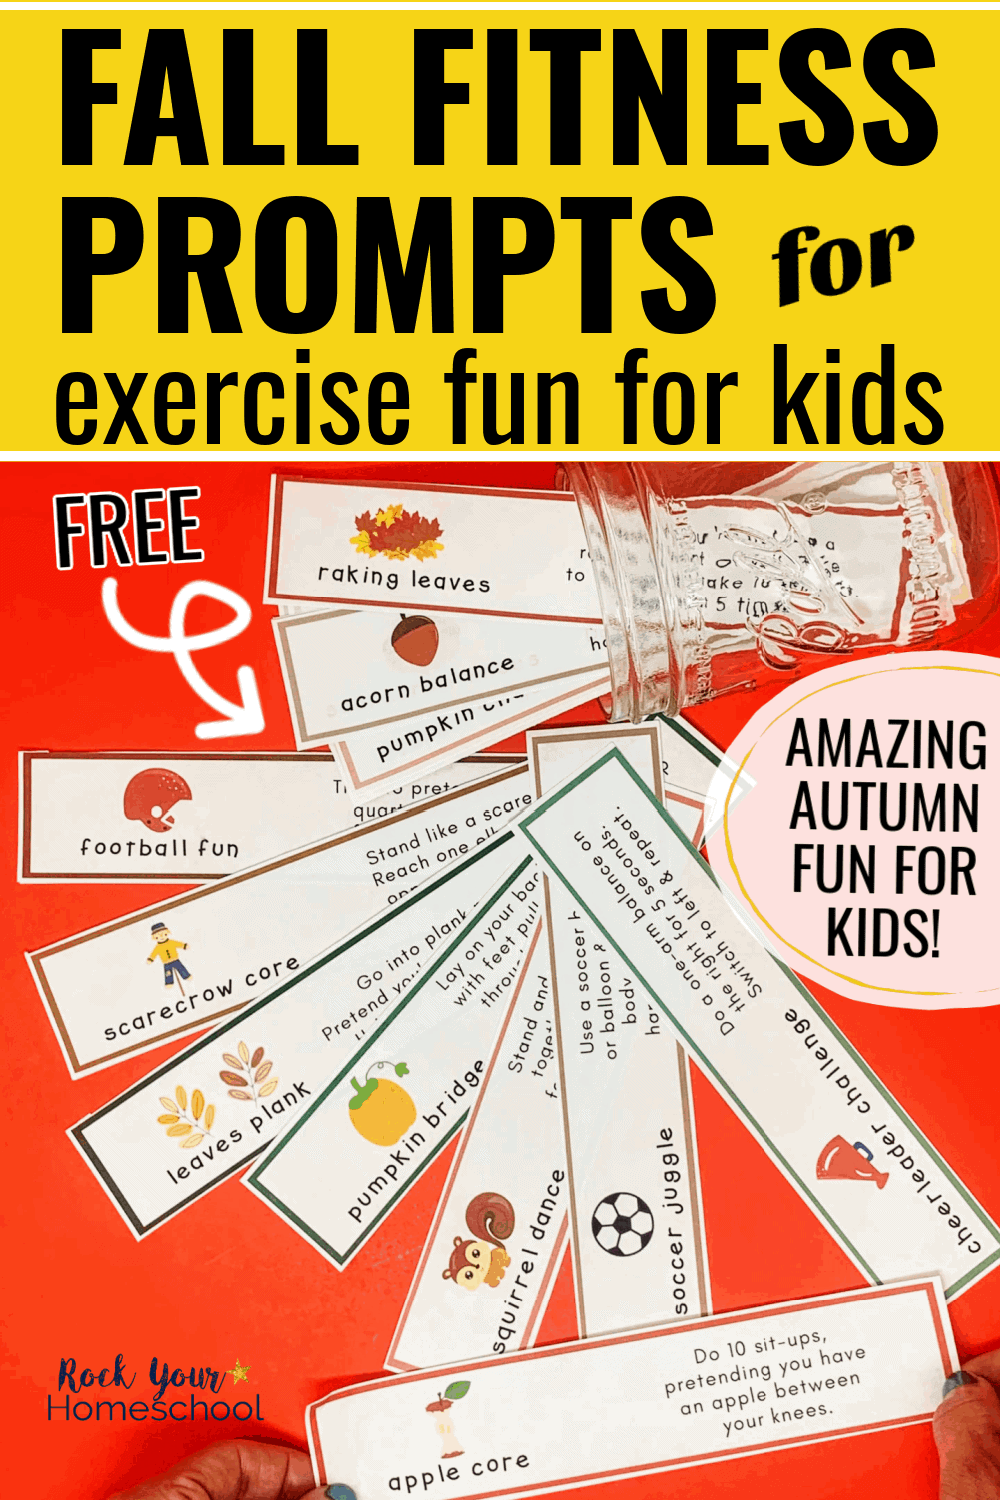 Free Fall Fitness Prompts for Fun Exercises for Kids